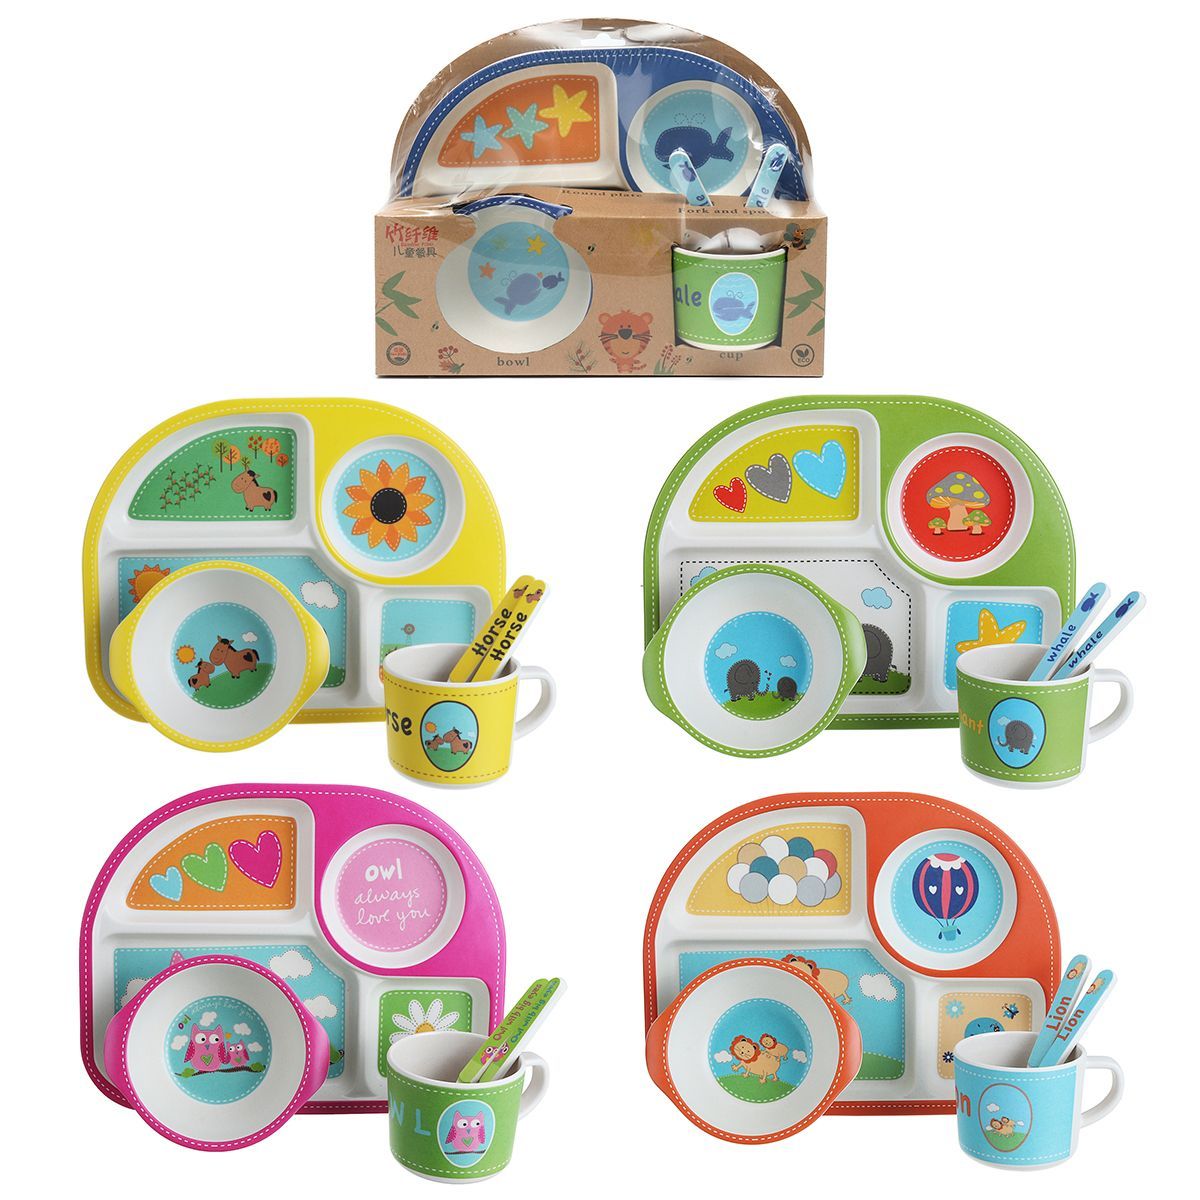 5-Style-Bamboo-Fiber-Colorful-Kids-Meal-Set-Feeding-Tools-Plate-Cup-Spoon-Fork-Kid-Bowl-1450868